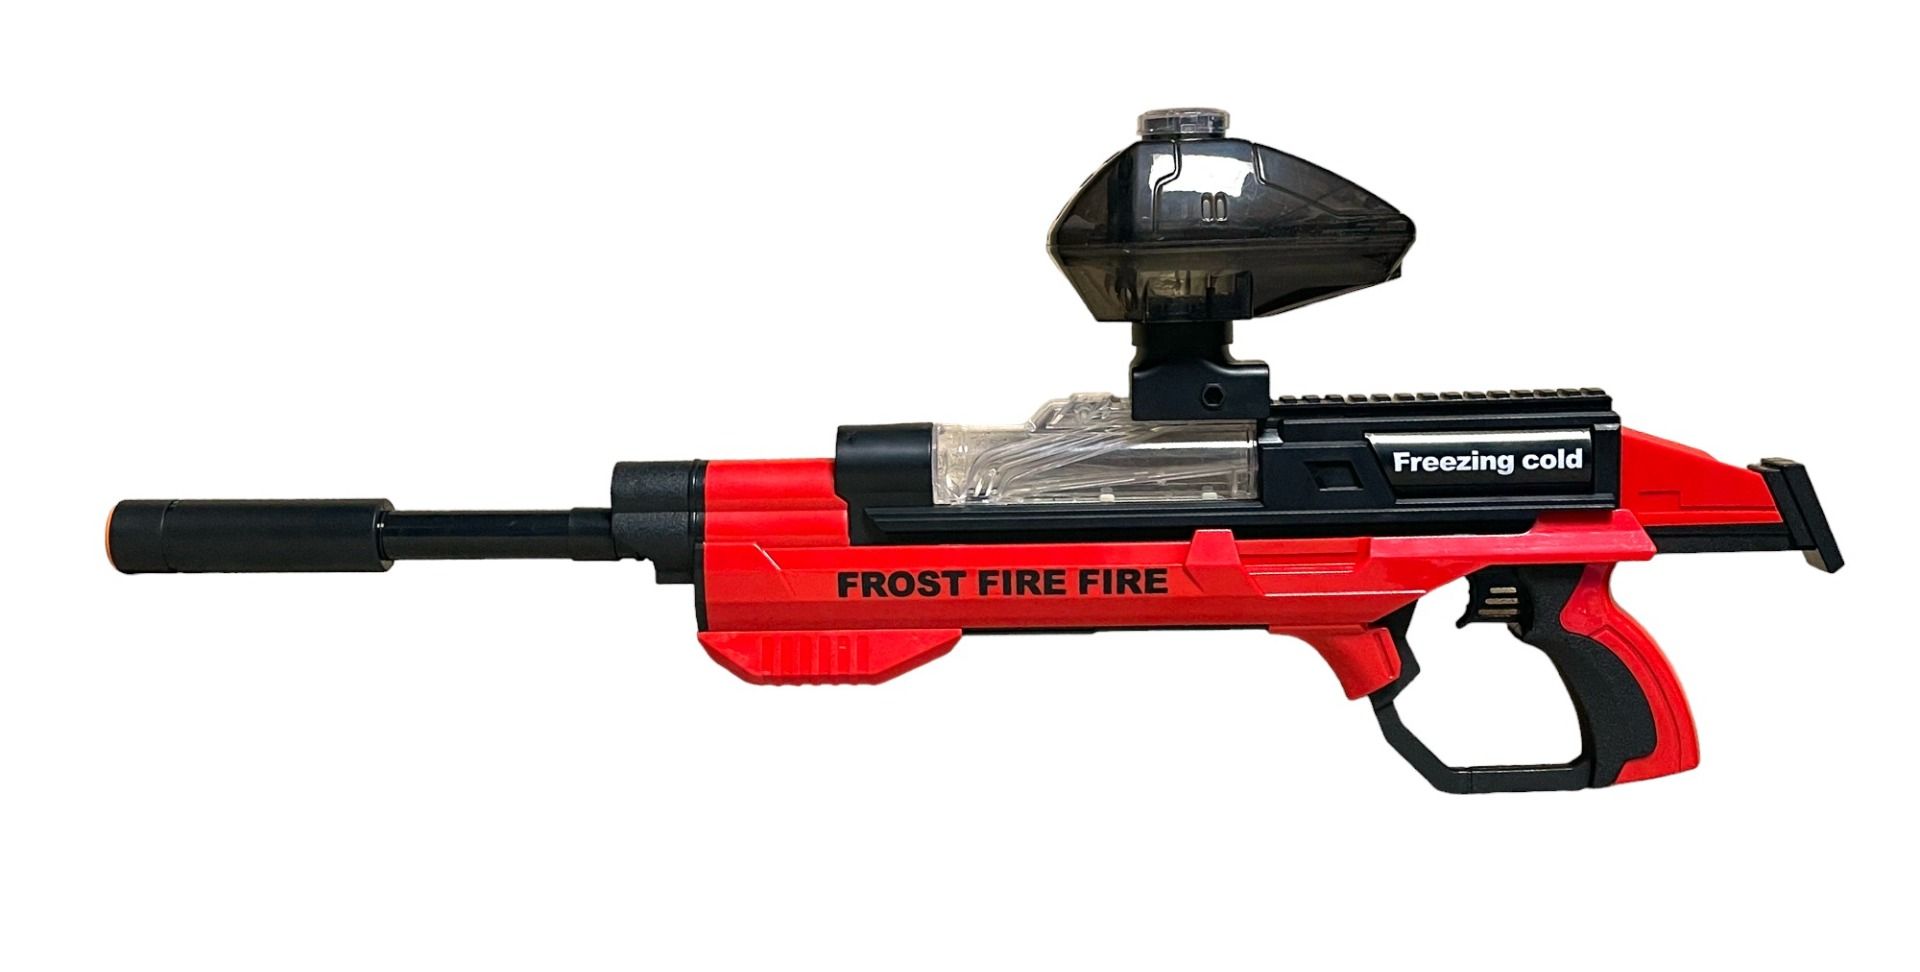 Gel Blaster - Alien Pulse with Silencer - 3:4 Scale - Colours May Vary - Includes Battery and Charger